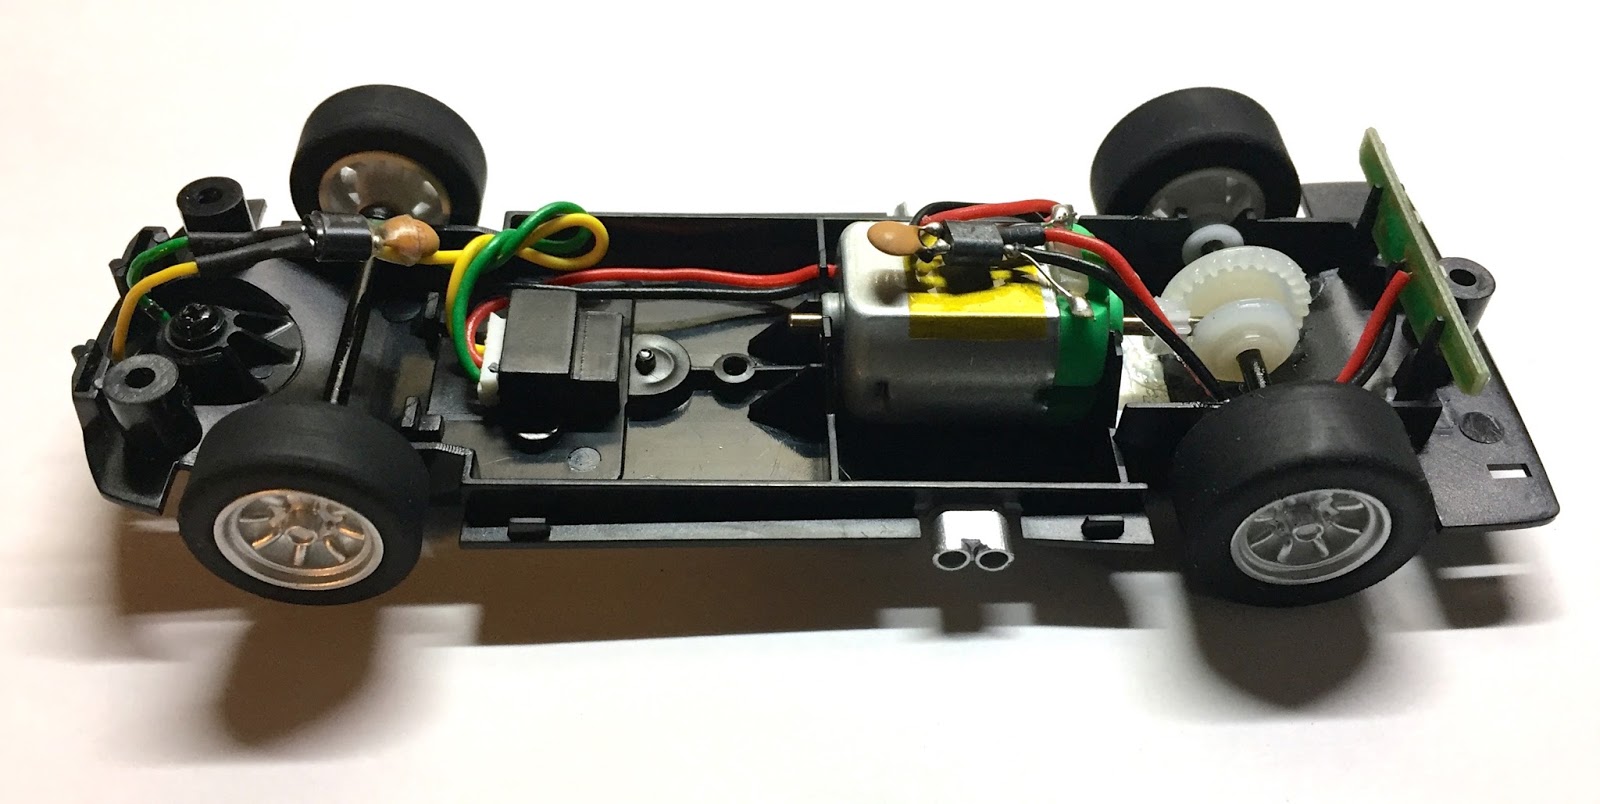 NEW Comme neuf Scalextric O6101 Avant Support de montage pour Johnson Motor 